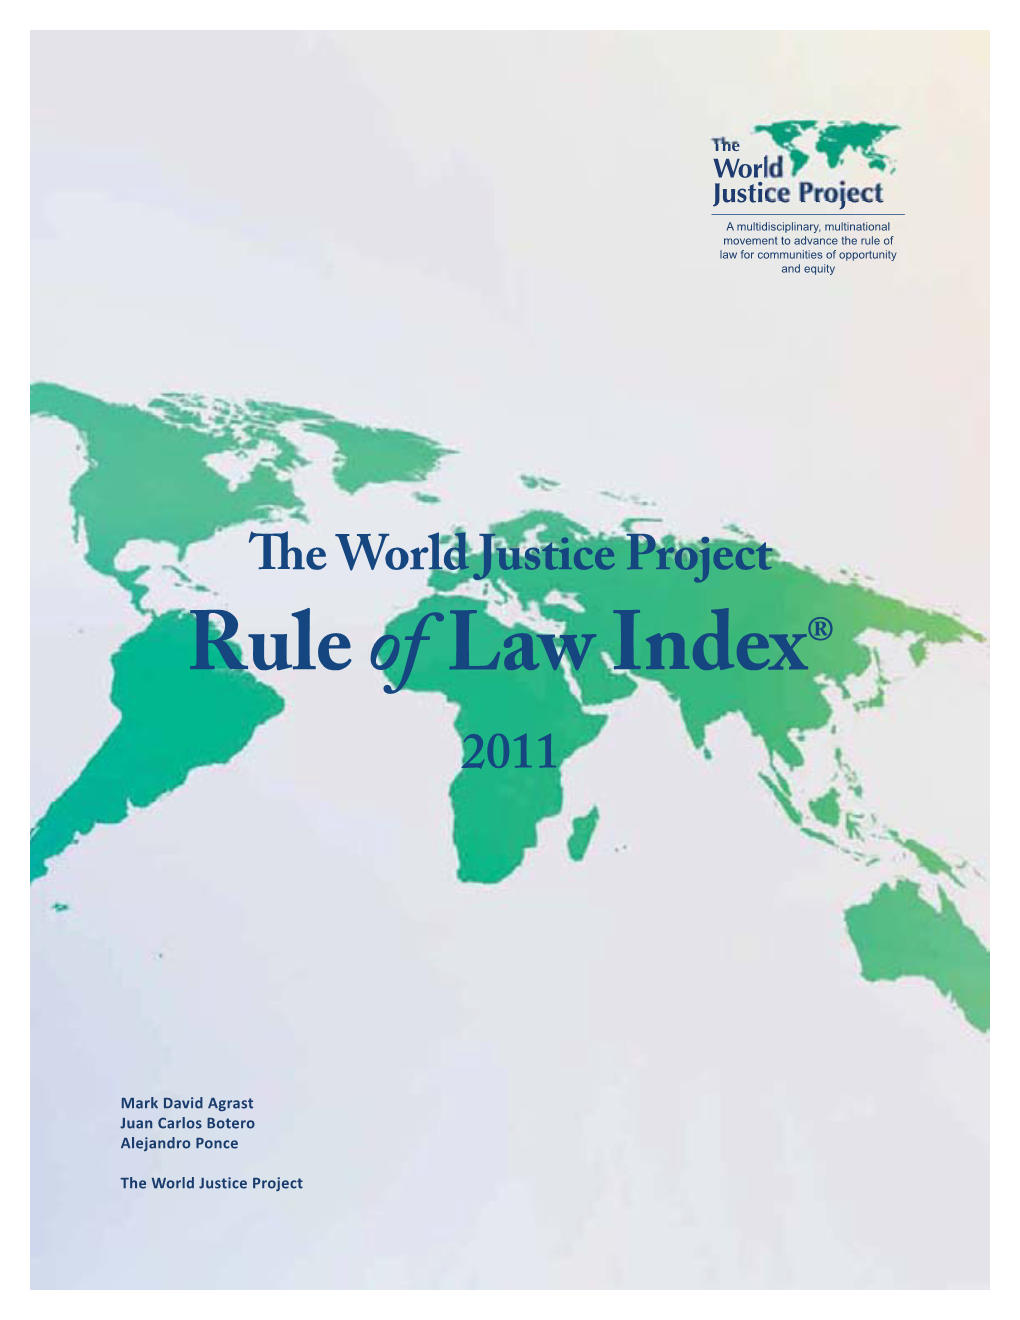 The World Justice Project: Rule of Law Index 2011